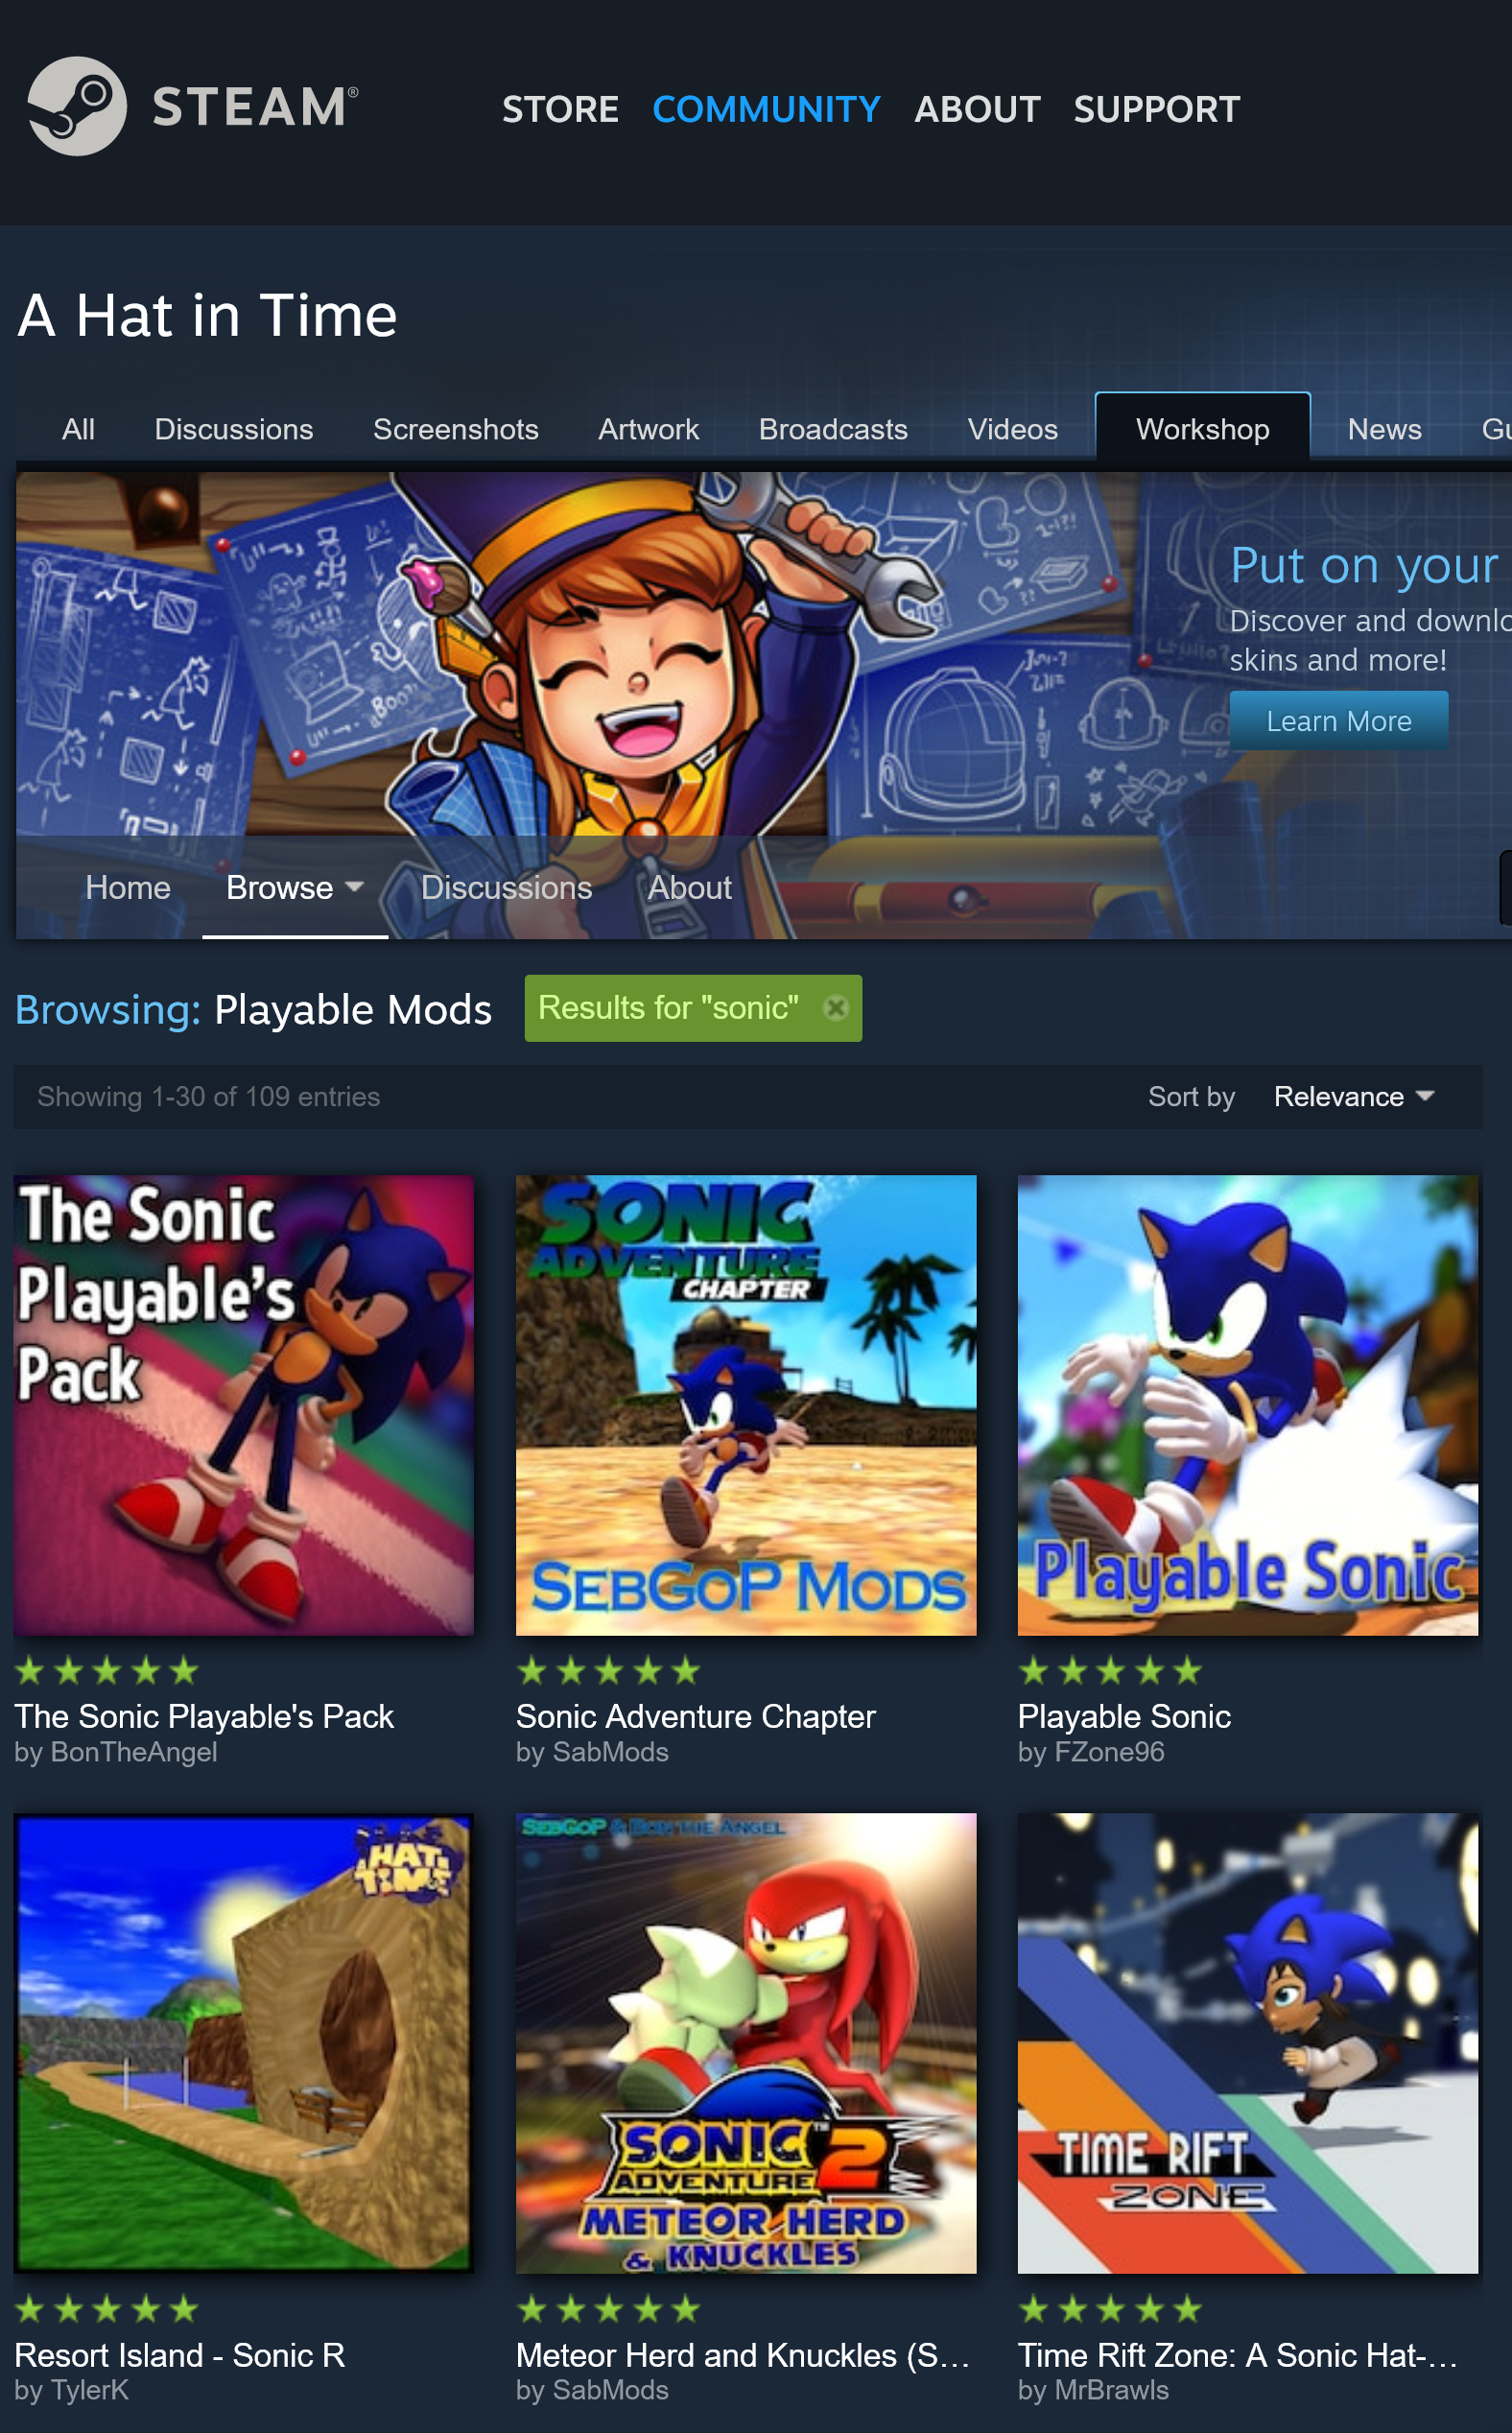 The search results for Sonic on the Steam Workshop for A Hat in Time.